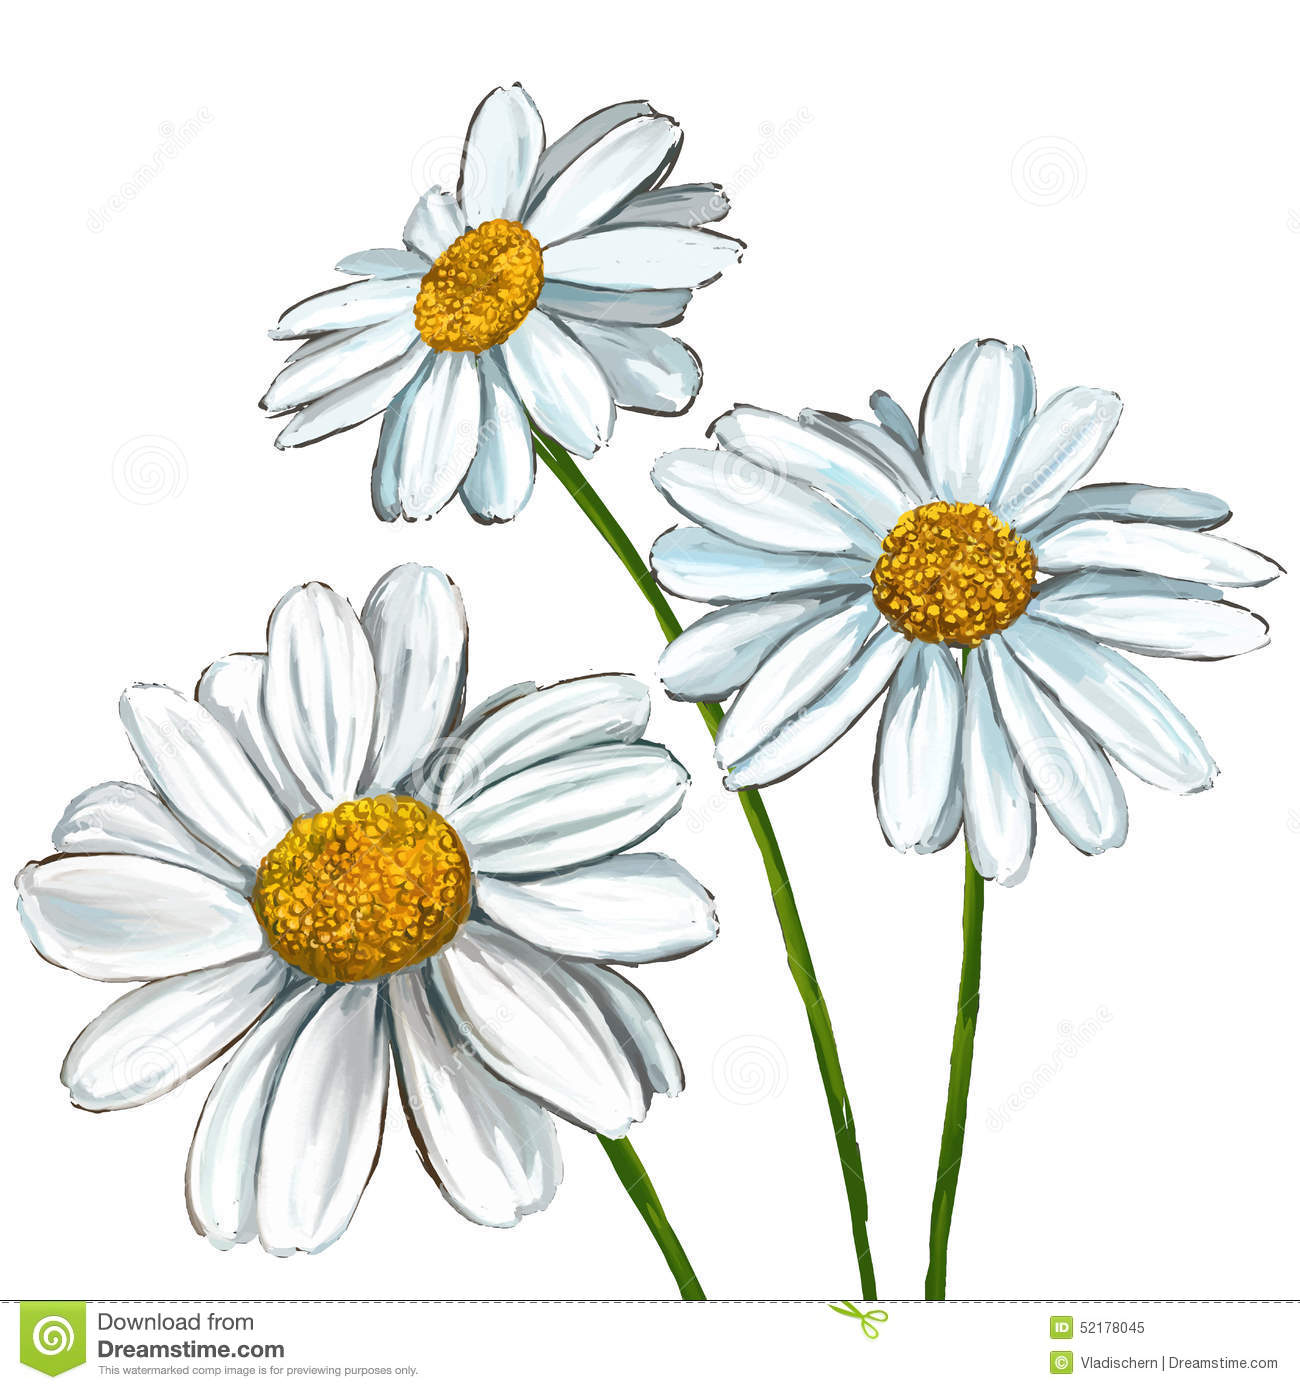 Albums 90+ Images pictures of daisies to draw Excellent